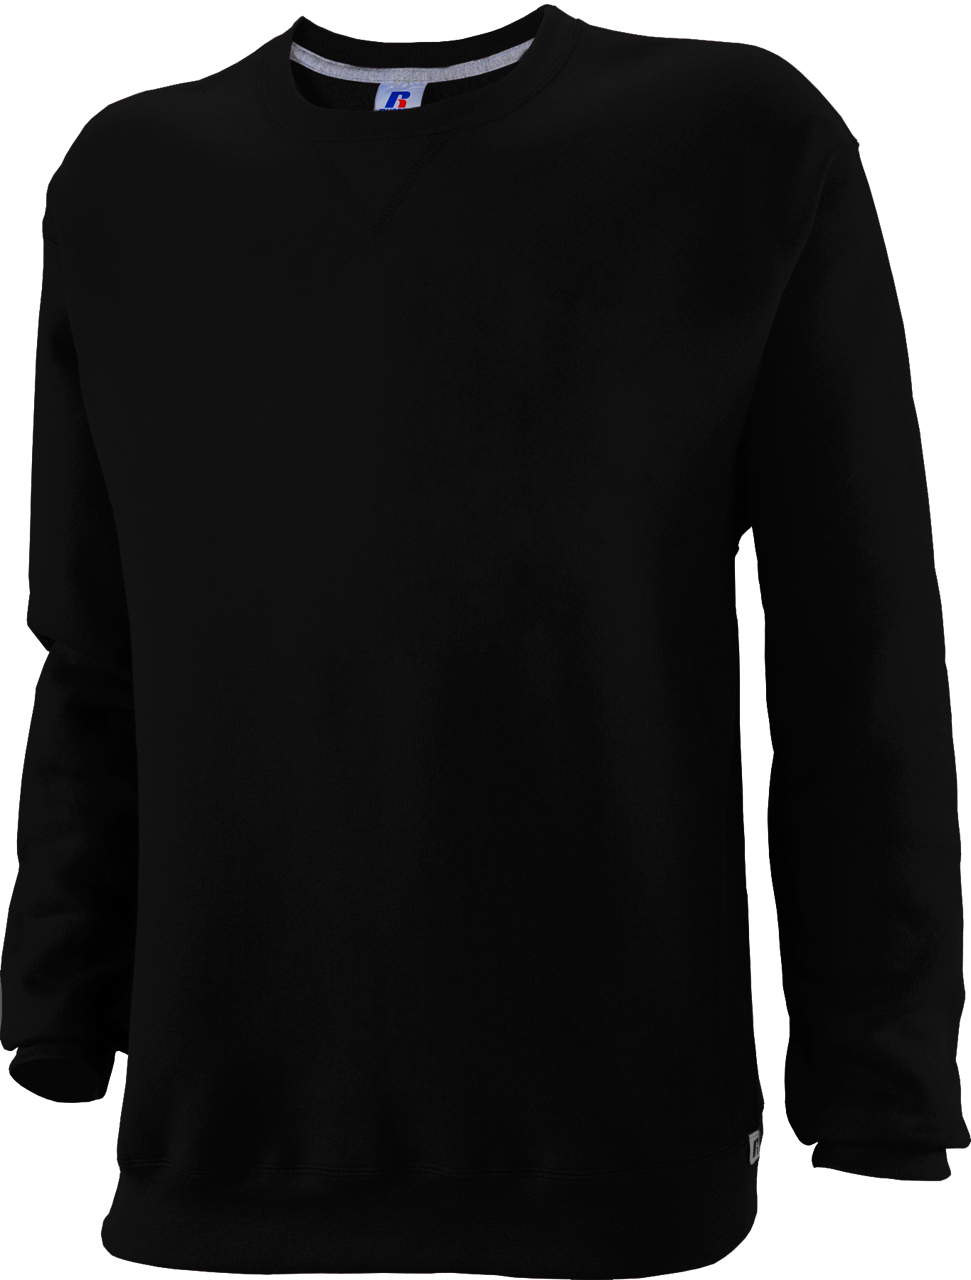 Picture of Russell Dri-Power Fleece Youth Crew Neck